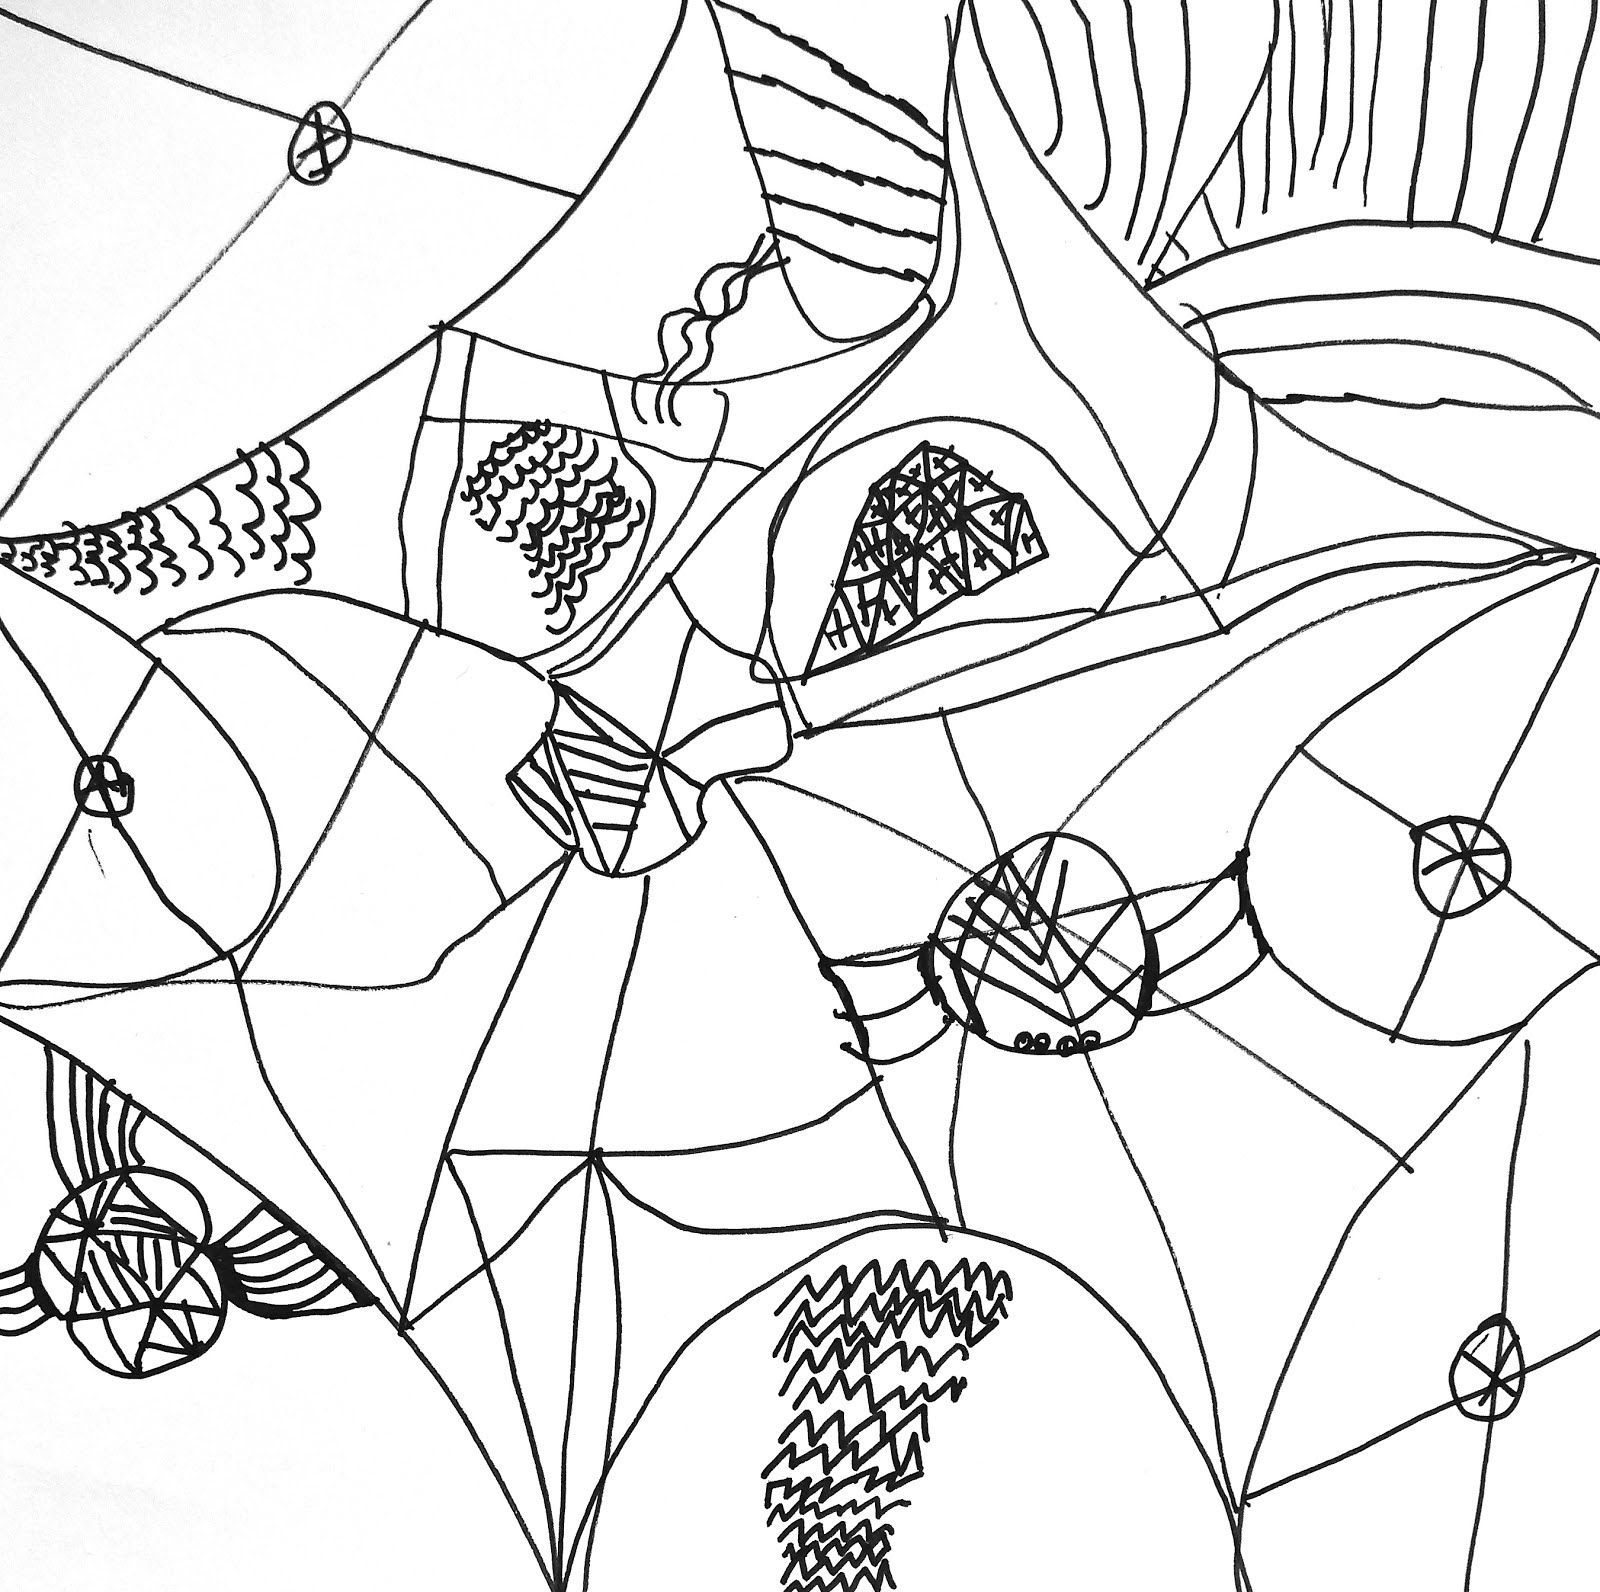 Ananse The Spider Coloring Pages - Coloring Pages For All Ages